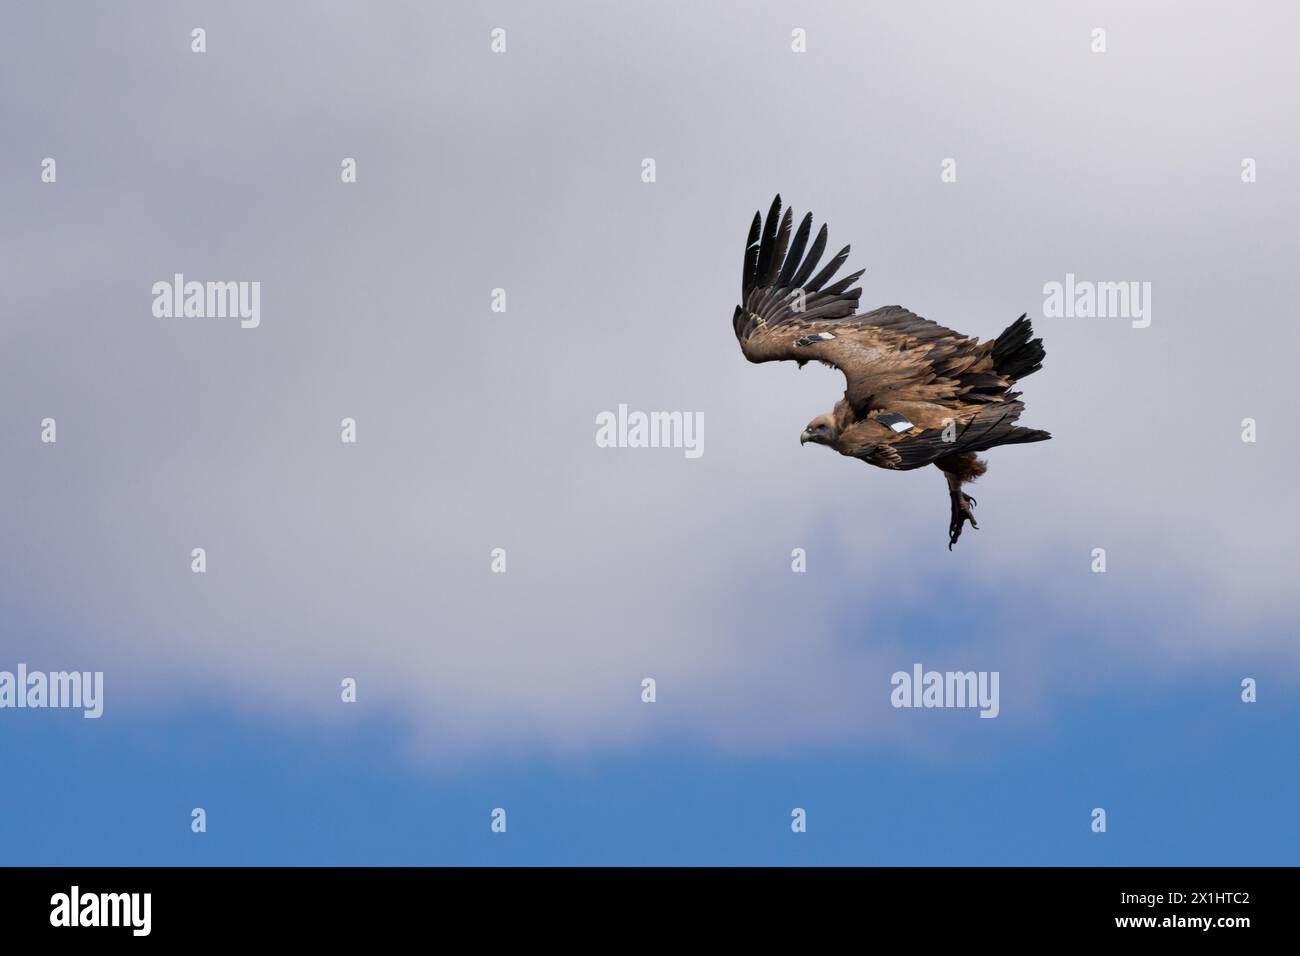 Vulture Gyps fulvus in descent position with cloud in the background, Alcoy, Spain Stock Photo